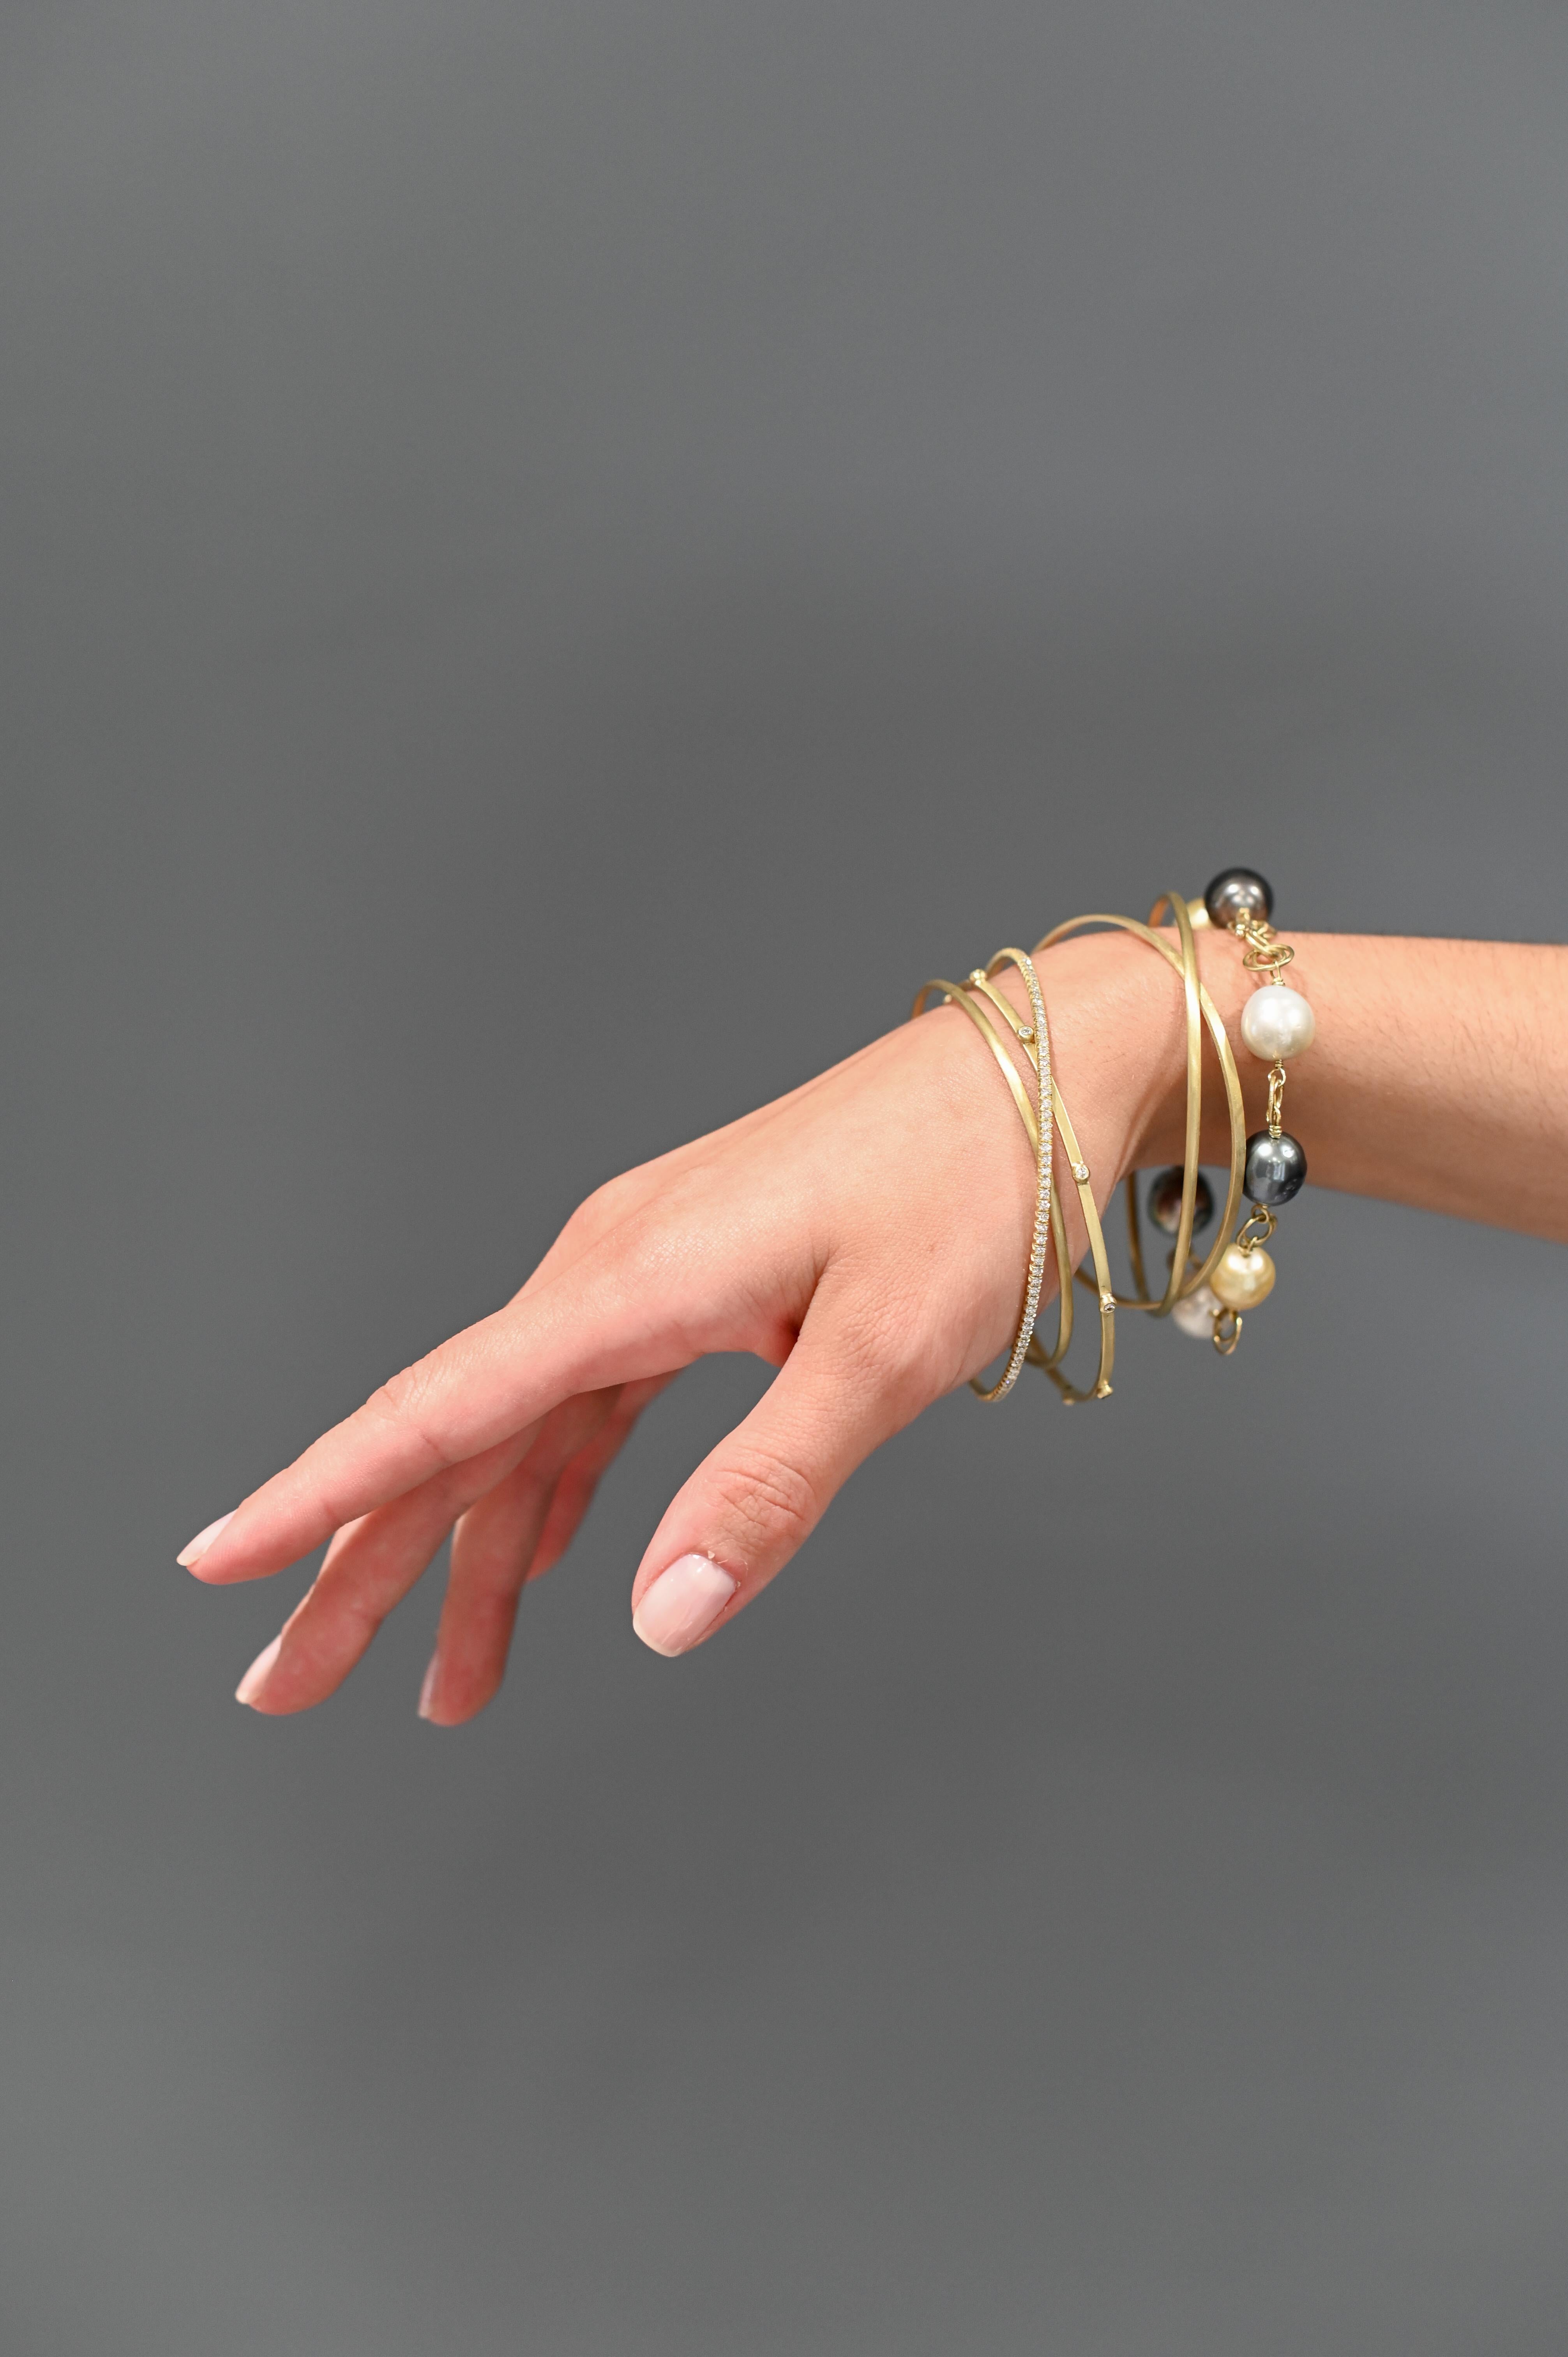 Faye Kim's 18 Karat Gold Thin Bangles - sold individually - are fabricated from solid gold. The bangles can be worn alone or stacked with multiples for your unique style. 

Width 2mm
Sizes:   
     Small 2.5